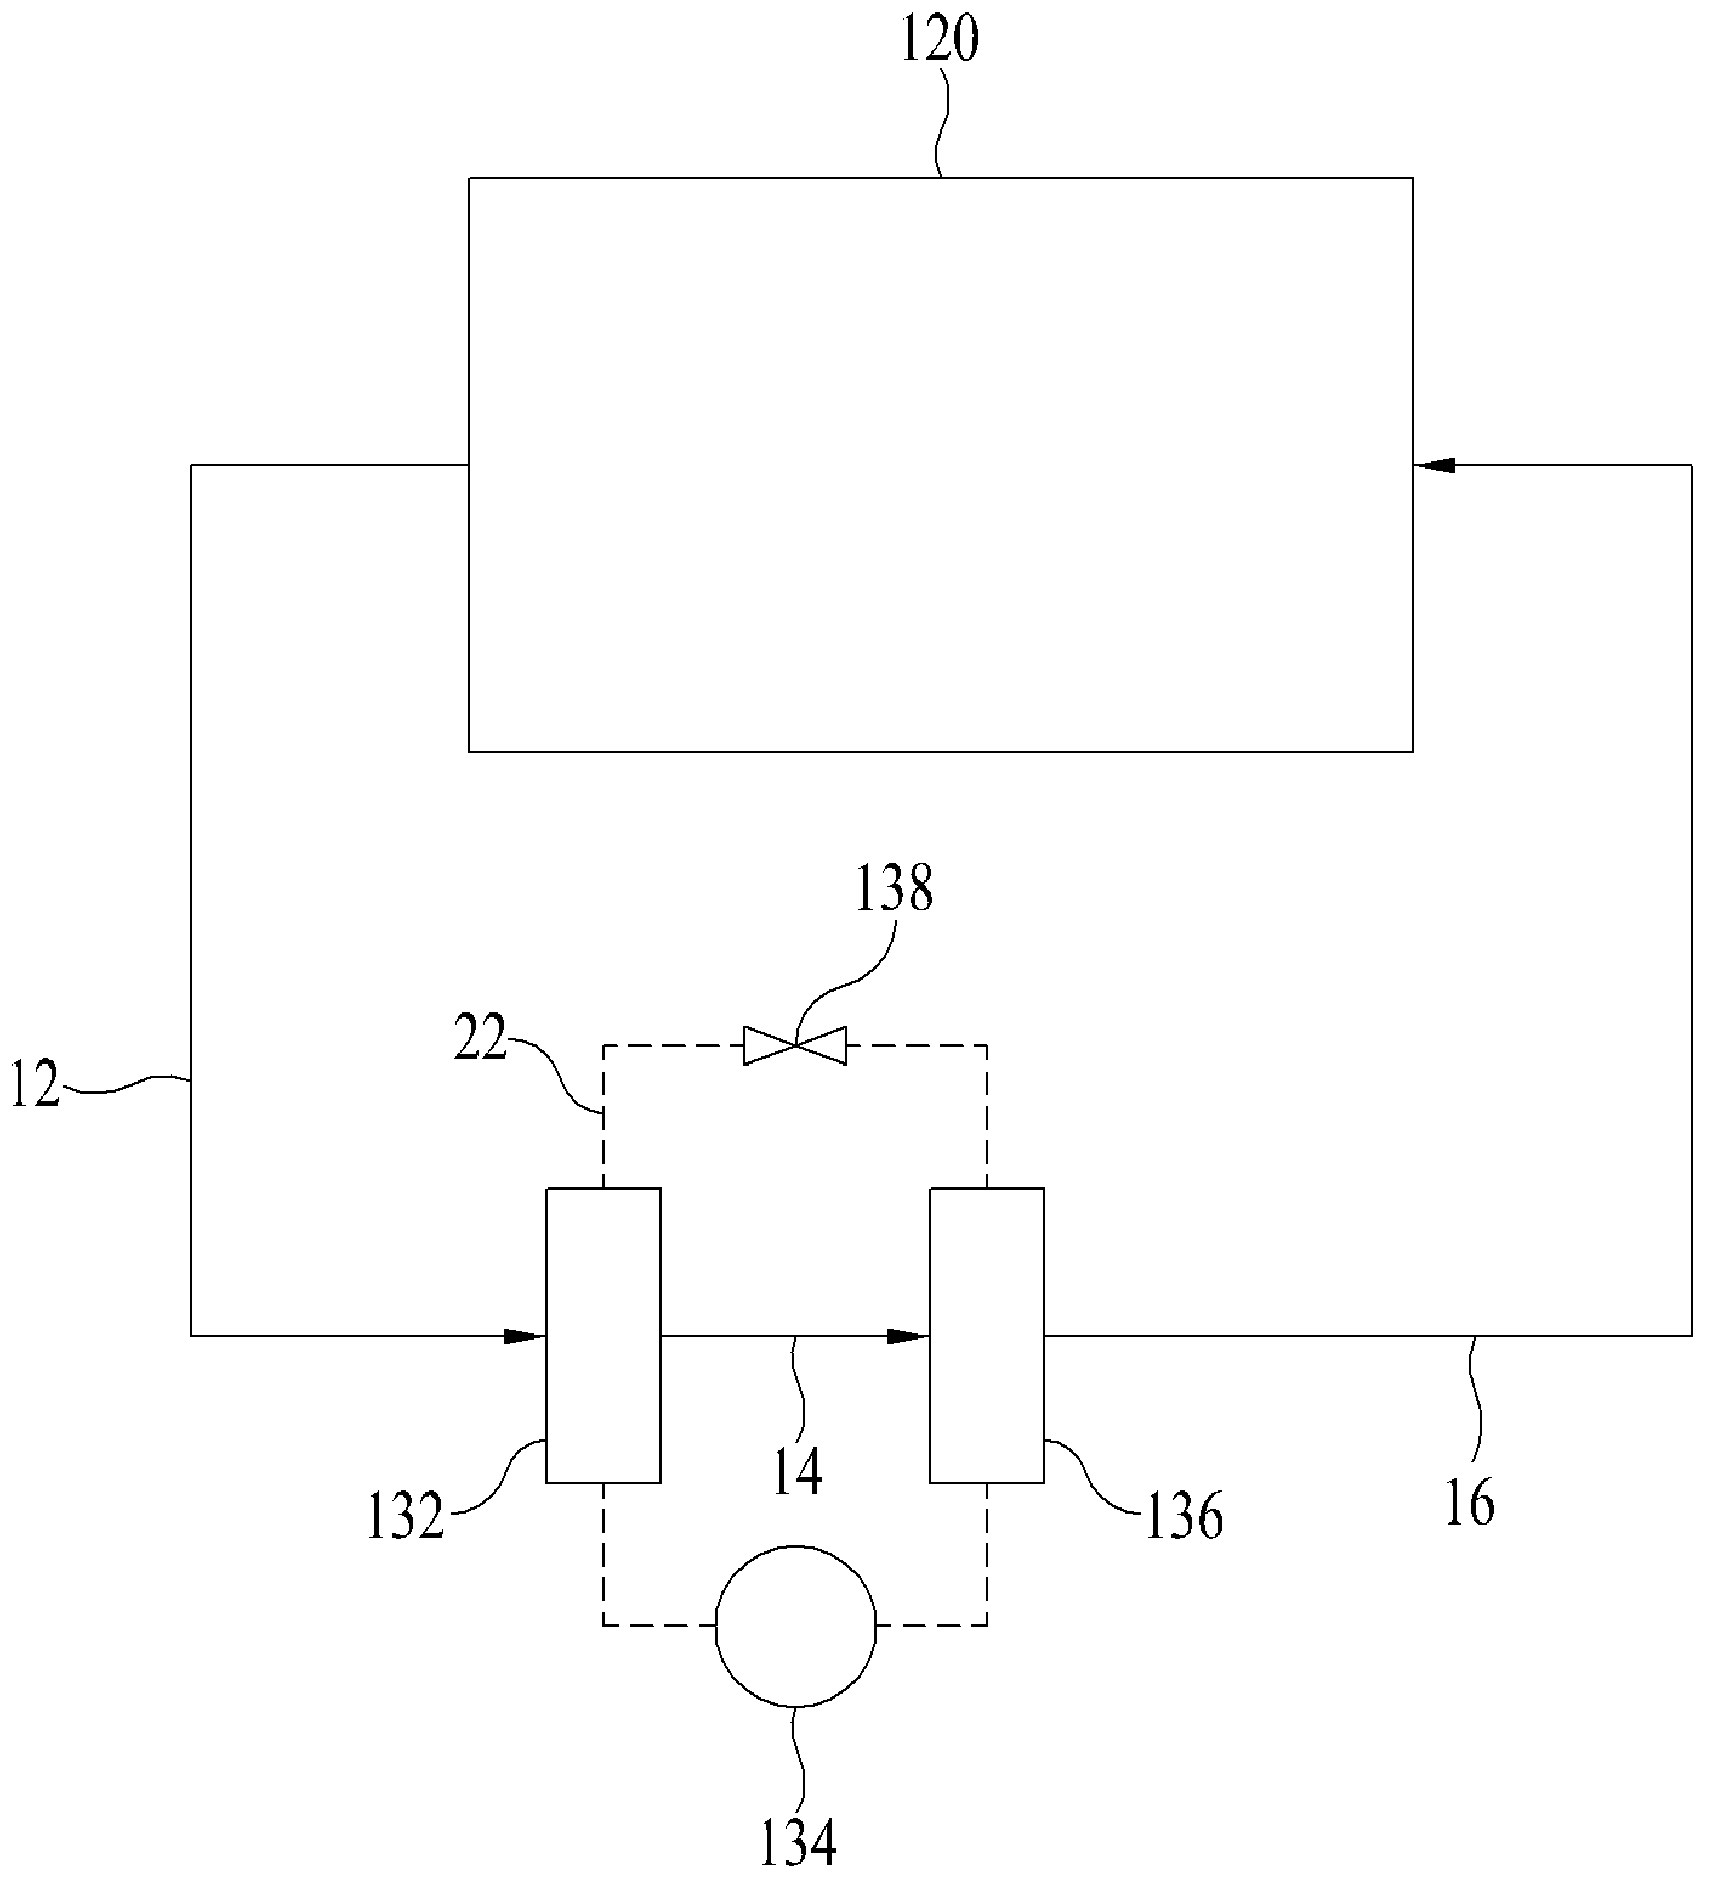 Method for controlling the operation of a dryer